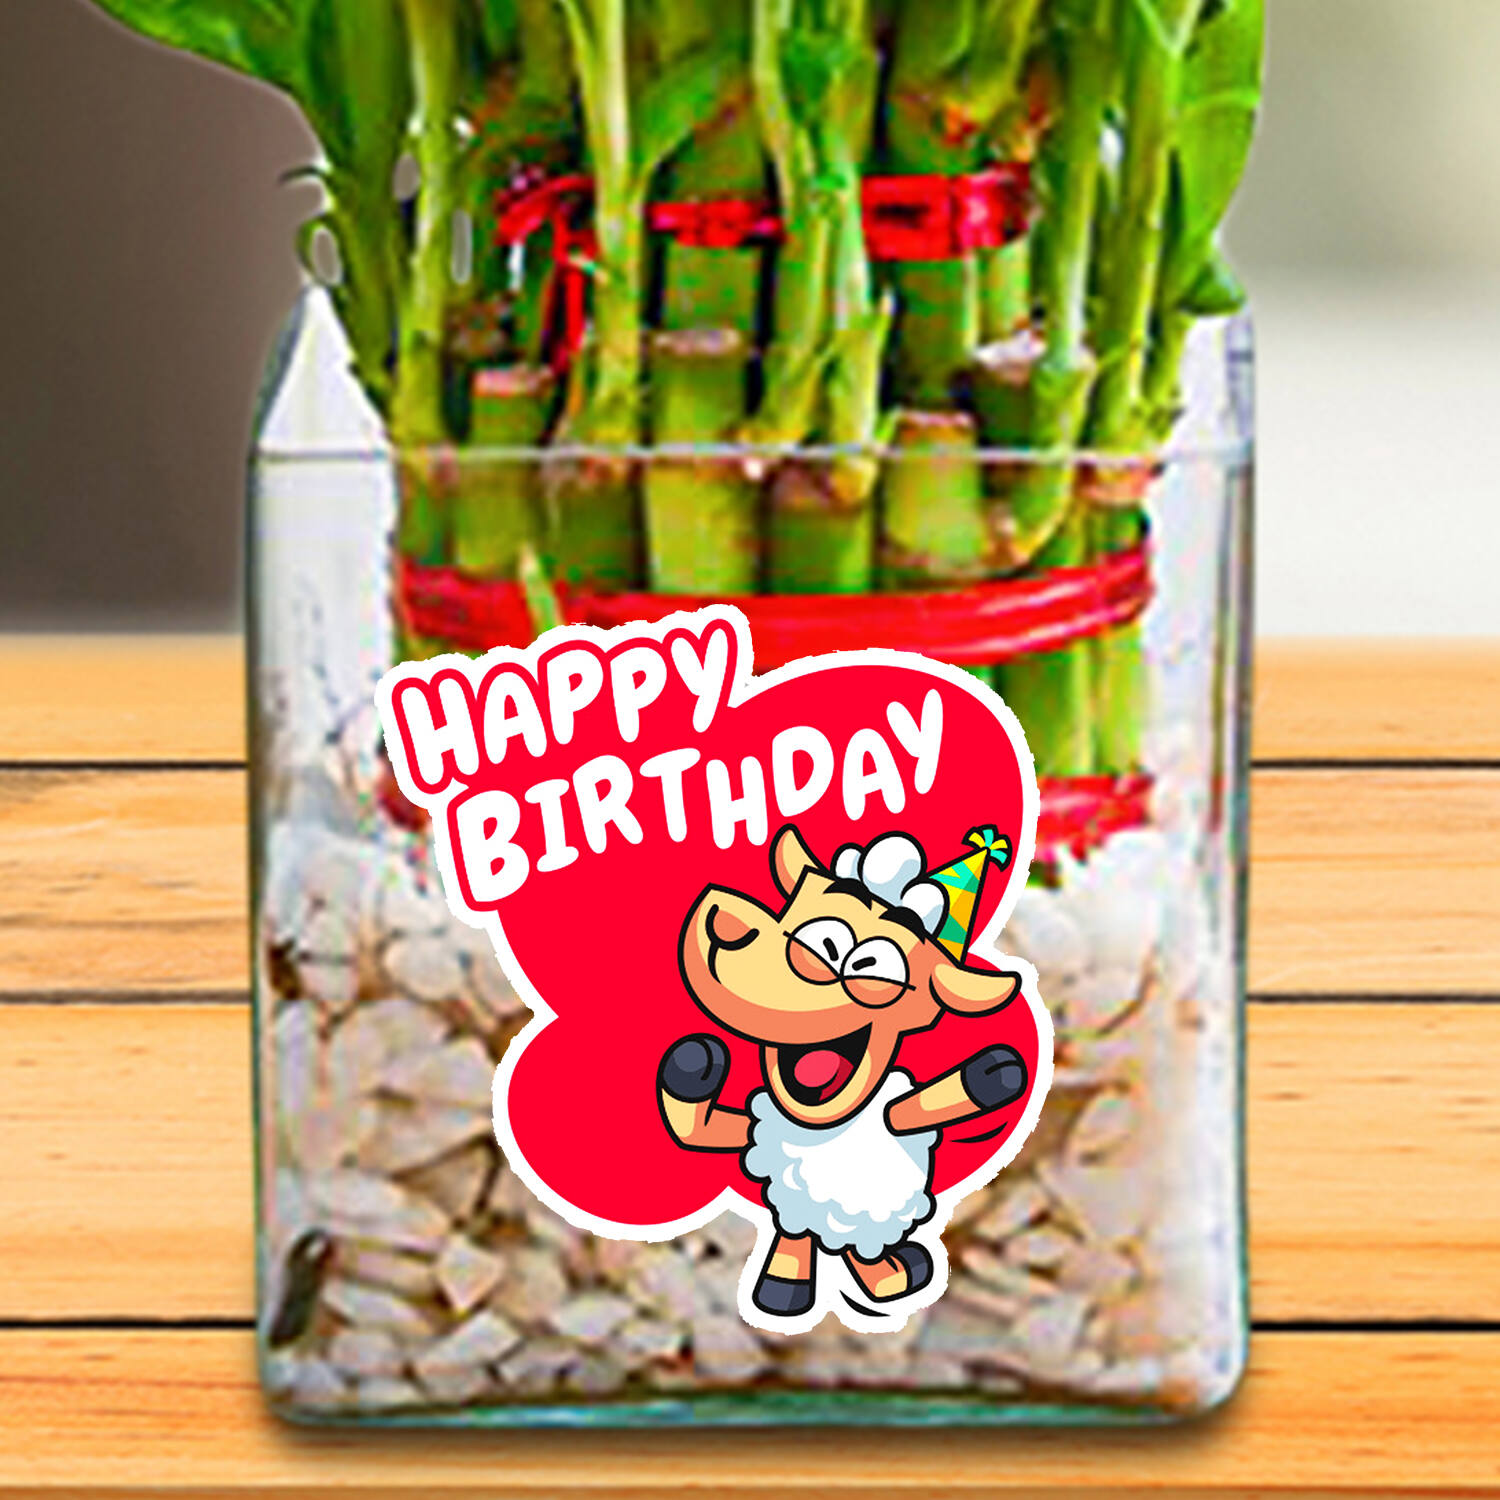 Amazon.com : Grow Shawty It's Your Birthday - Greeting Card - Plant Lover -  Meaningful Gift Cards - Potted Plant Lover Gift Card - Happy Birthday Card  : Office Products